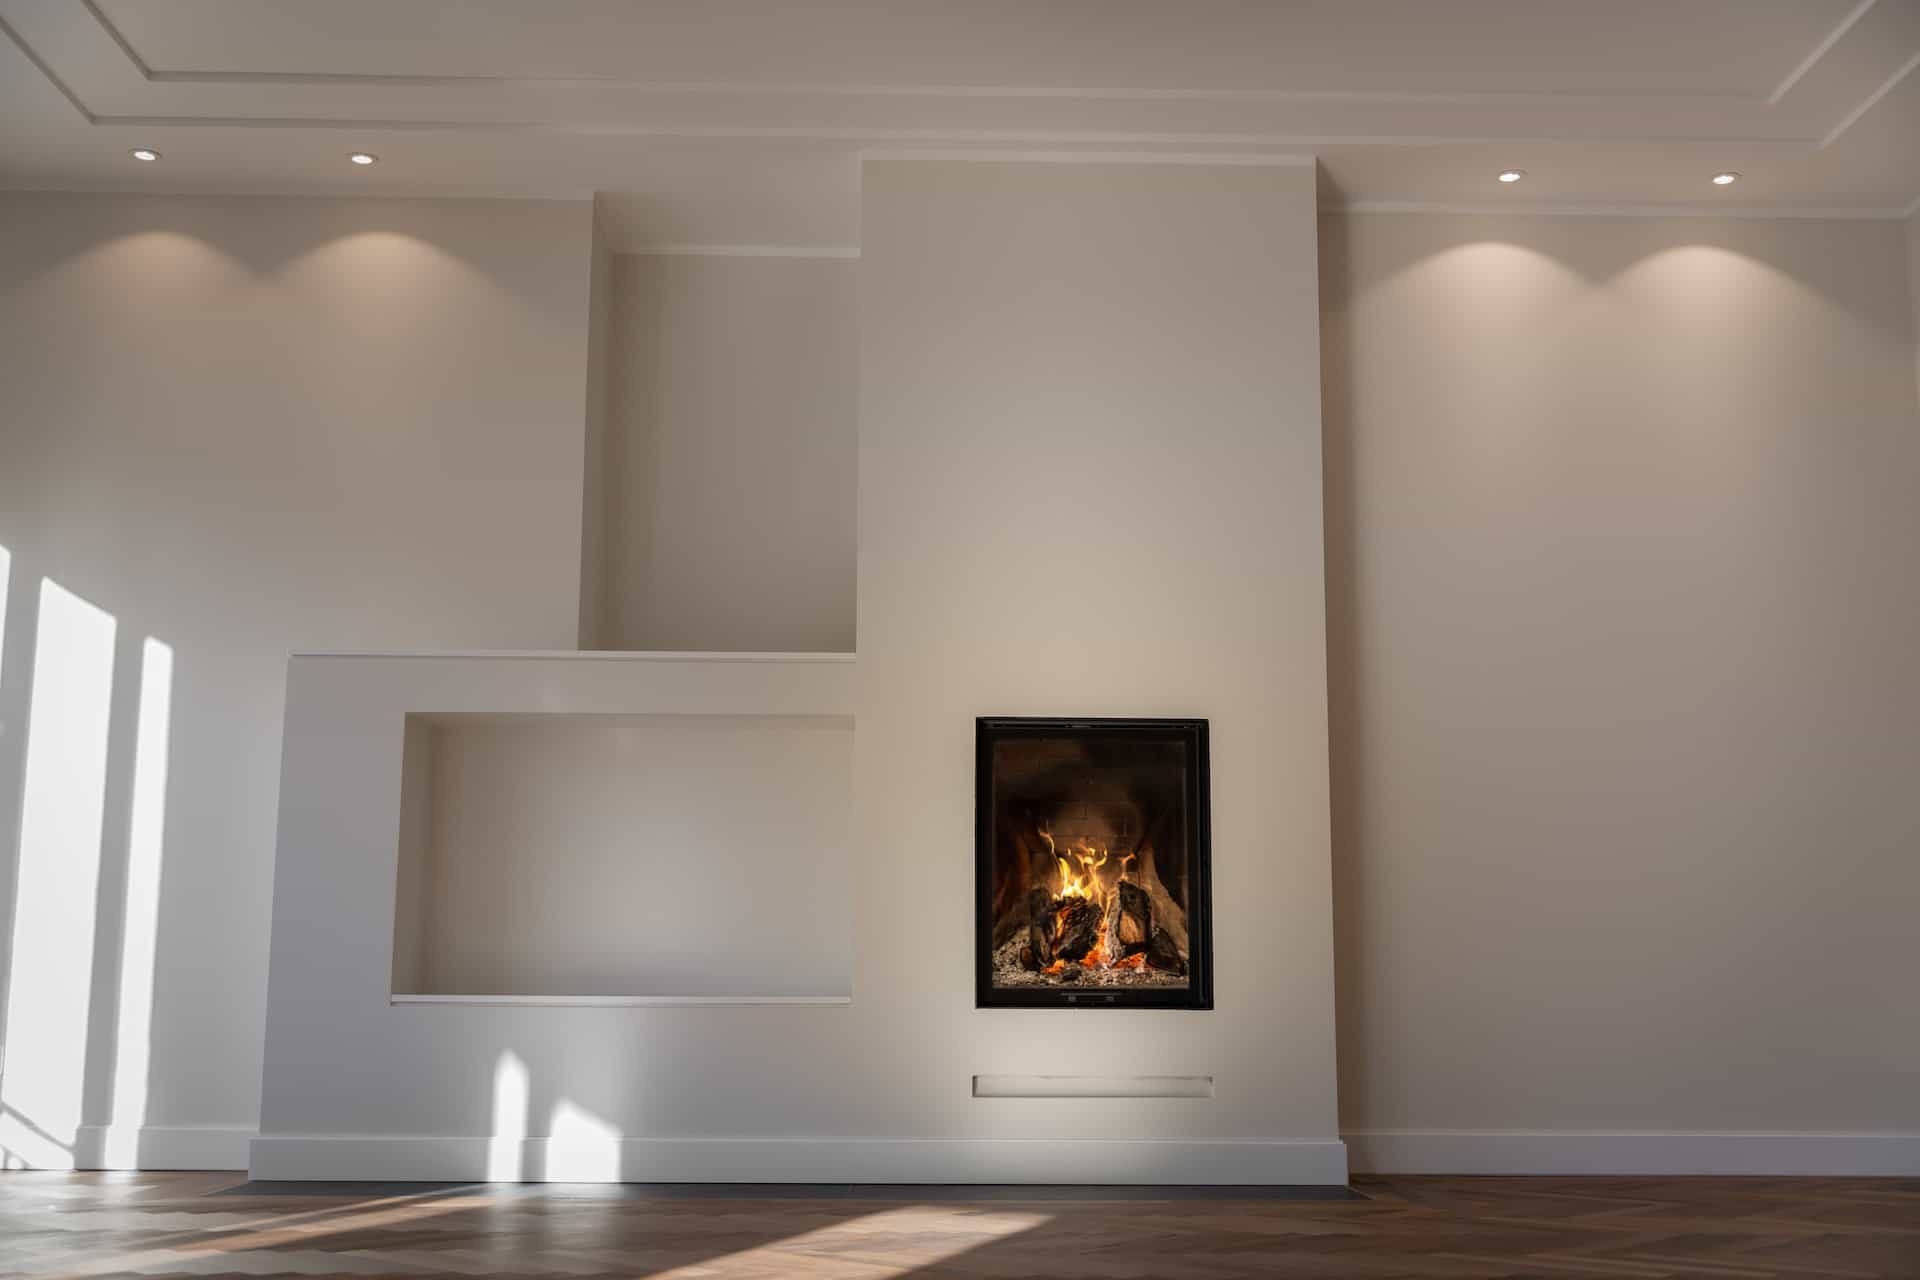 Bio-fireplace – atmospheric and ecological